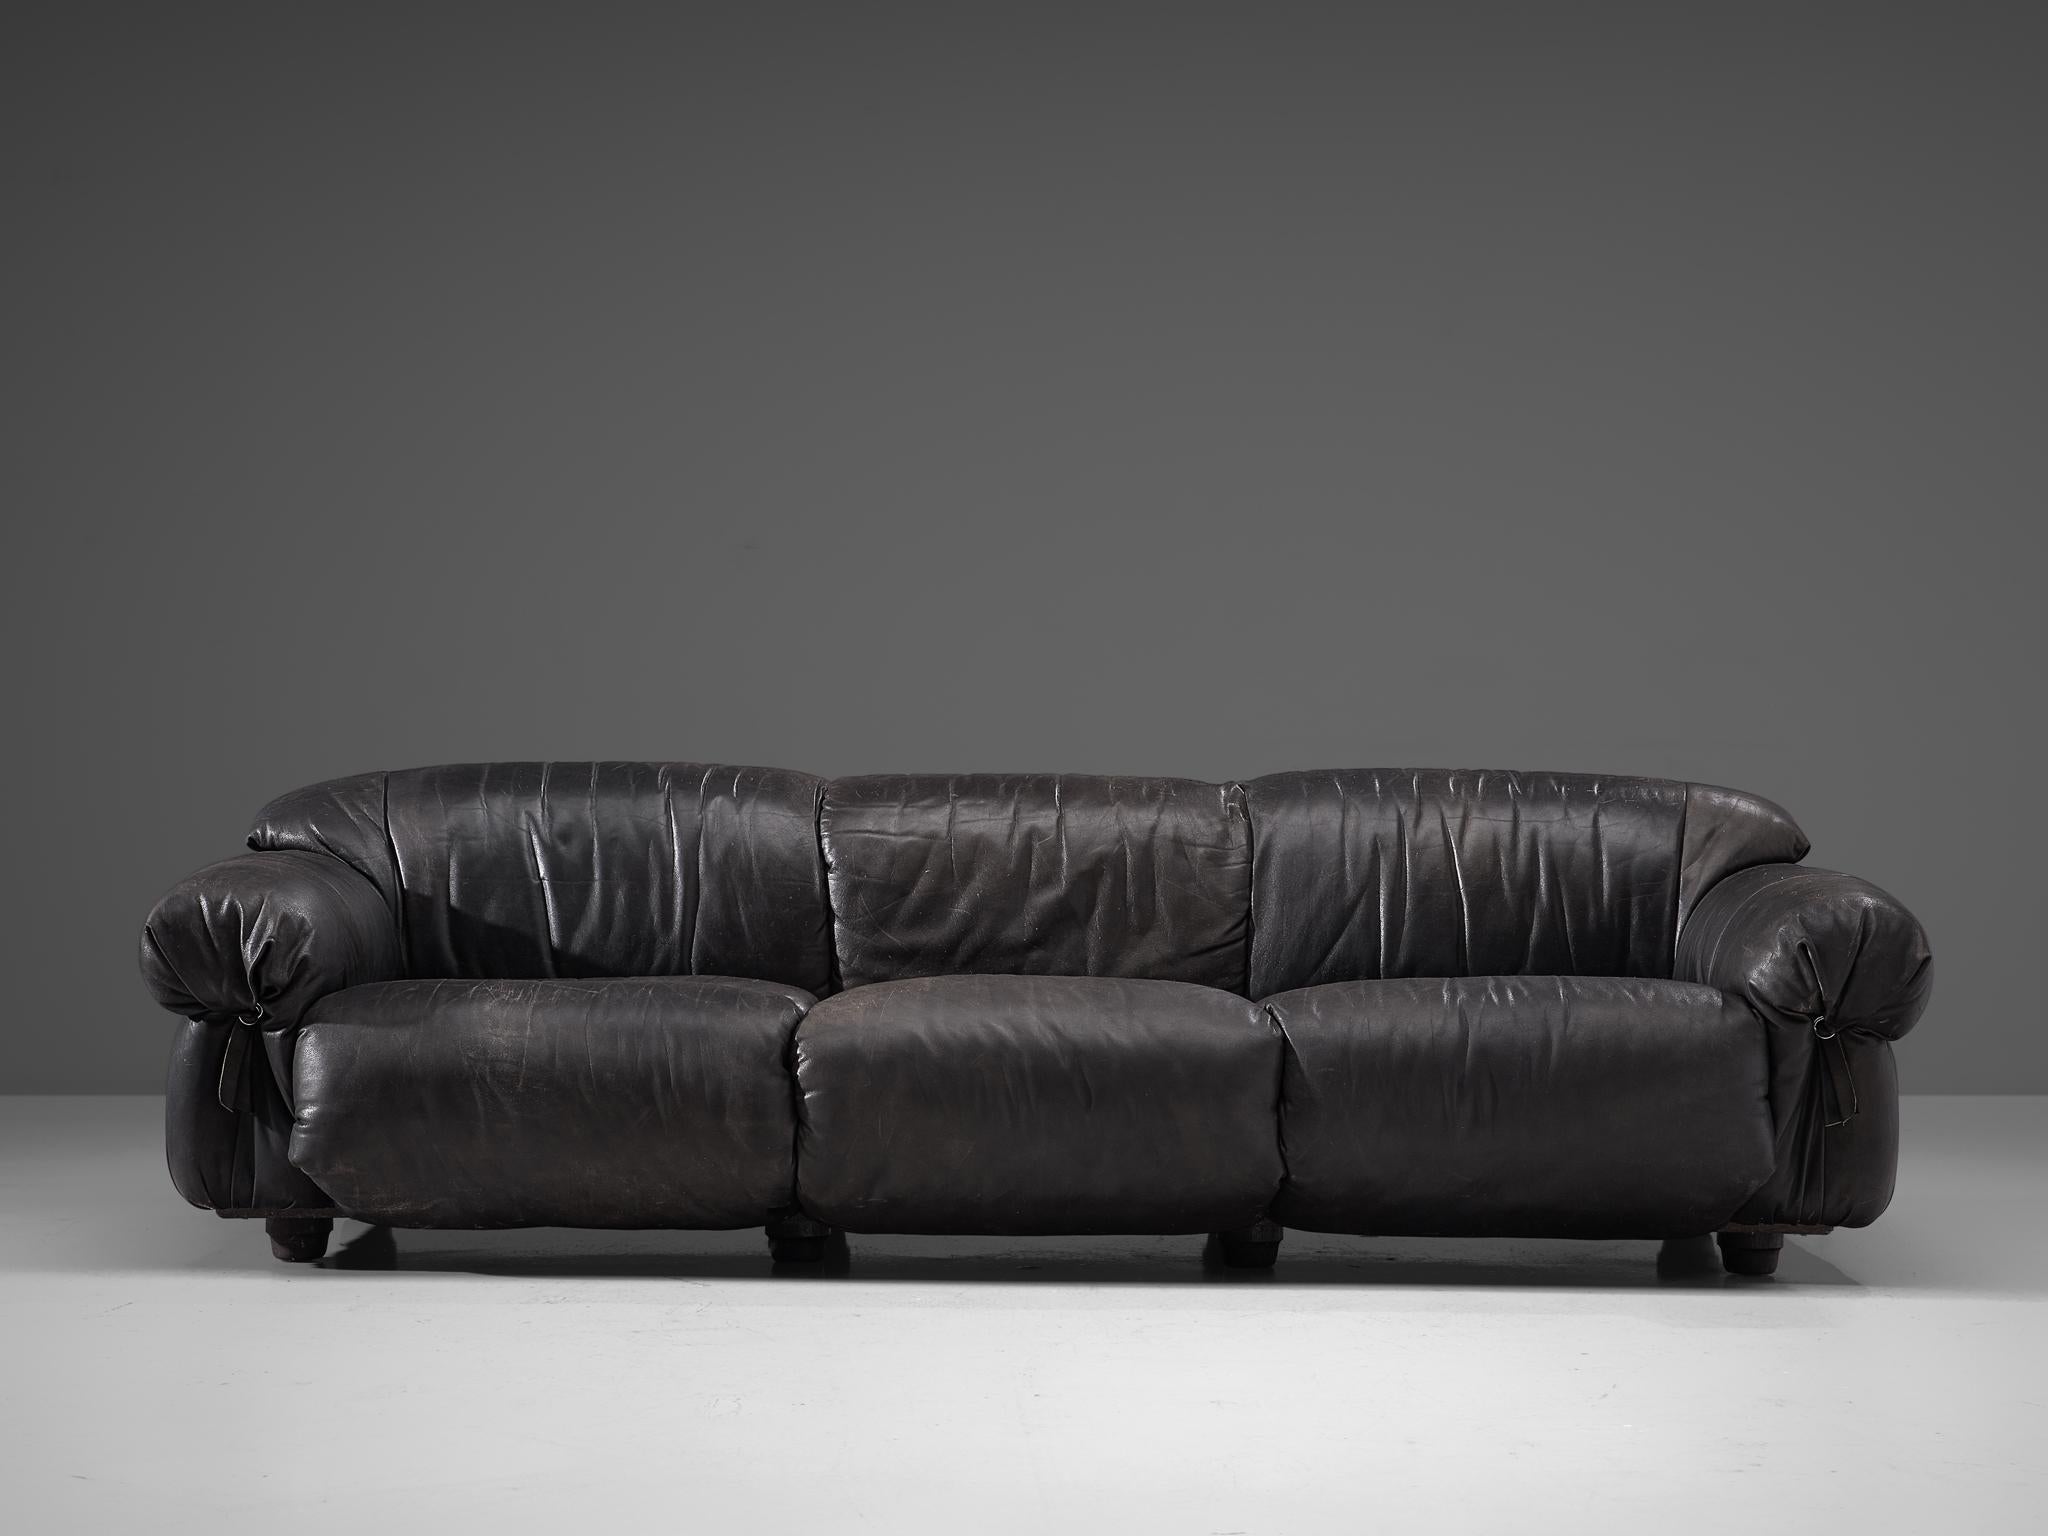 Three-seat sofa, leather, Italy, 1970s.

Grand and bulky three seat sofa. Completely covered in high quality, thick leather that patinated beautiful over the years. The draped and folded leather is finished with leather straps at the front of the